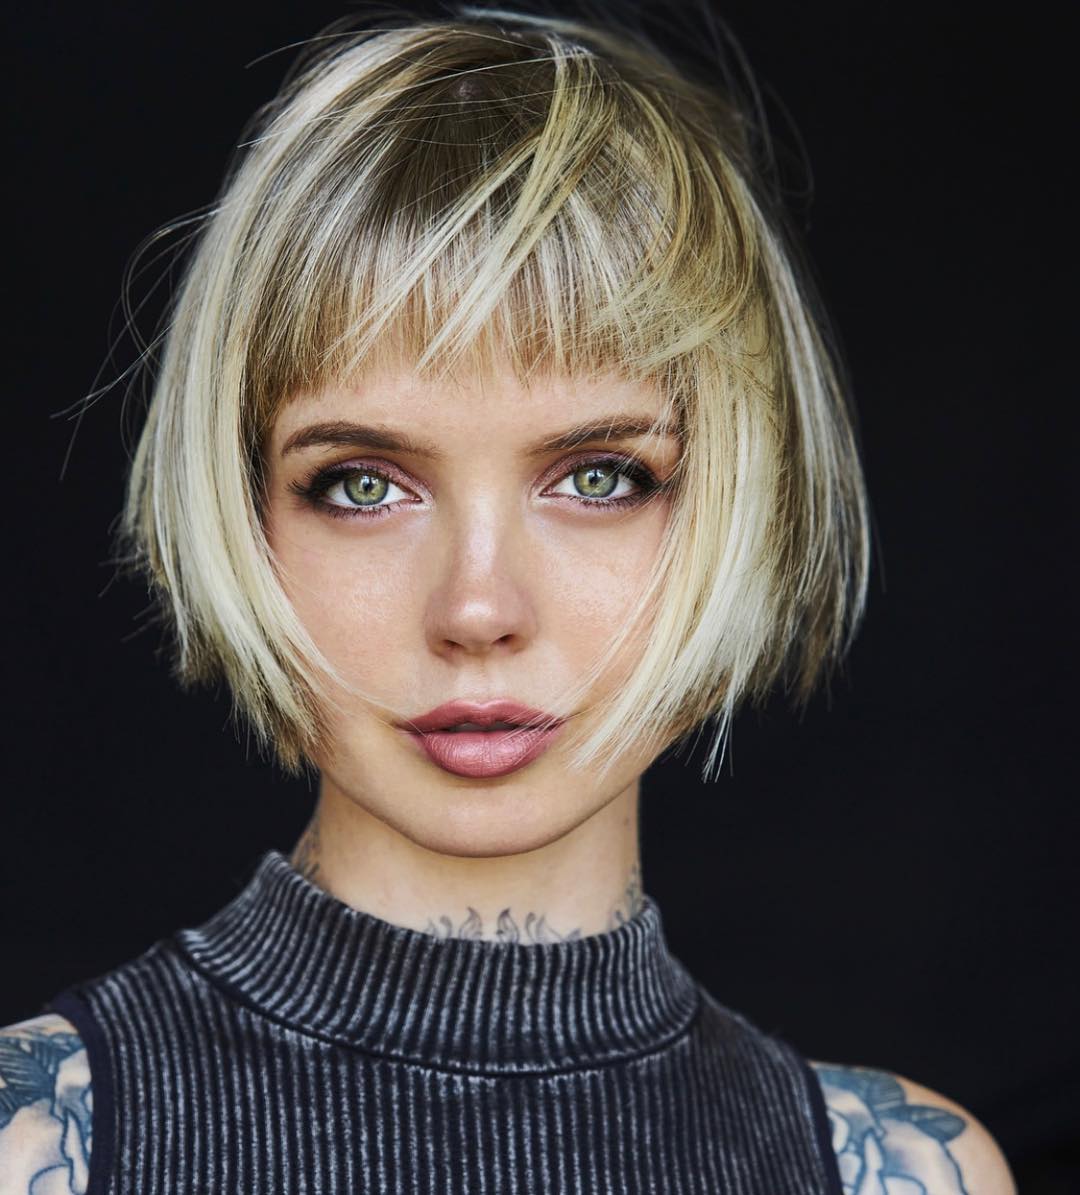 Stylish Short Hairstyles for Thick Hair, Women Short ...